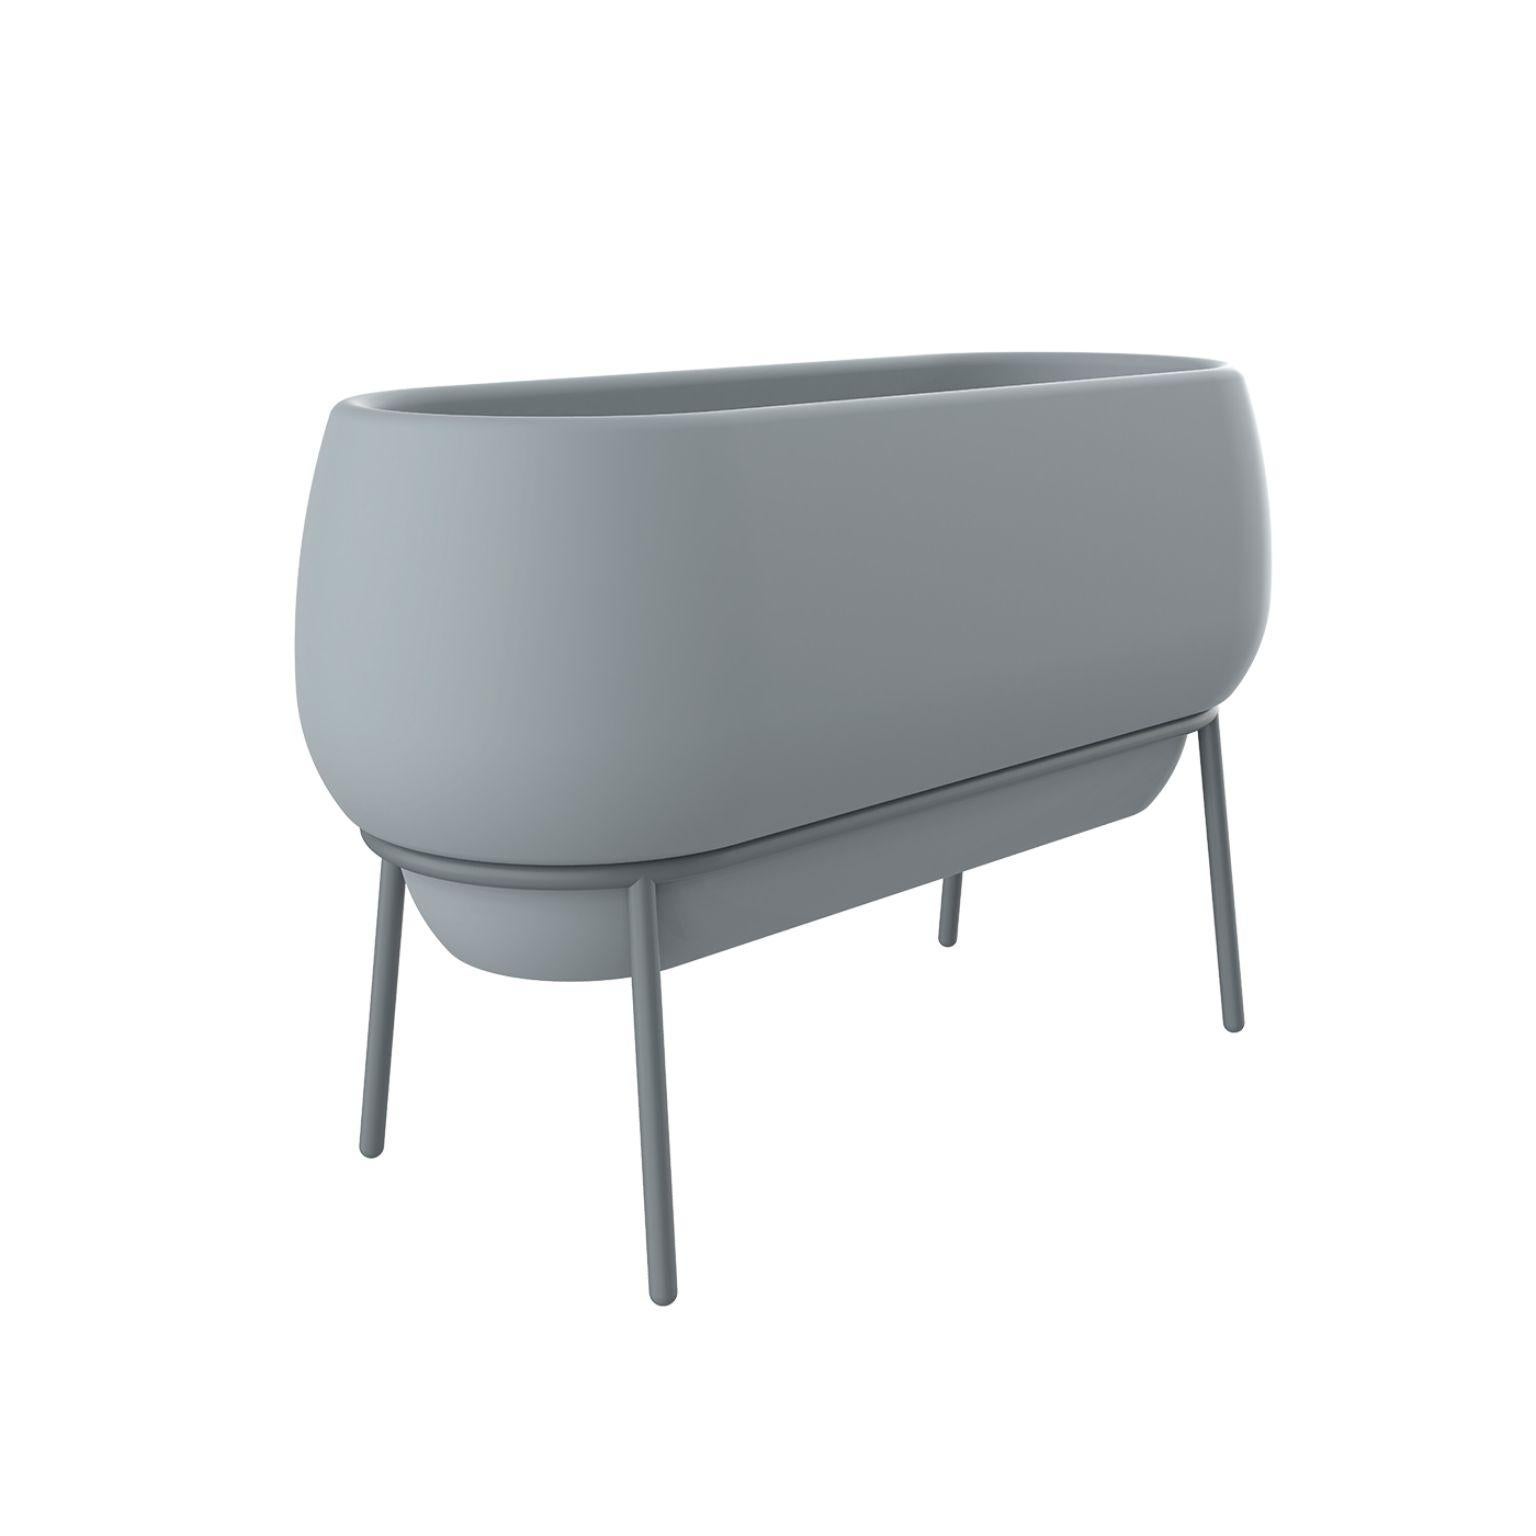 Lace grey planter by Mowee.
Dimensions: D50 x W120 x H76 cm.
Material: Polyethylene and stainless steel.
Weight: 13.5 kg.
Also available in different colours and finishes. (Lacquered or retroilluminated).

Lace is a collection of furniture